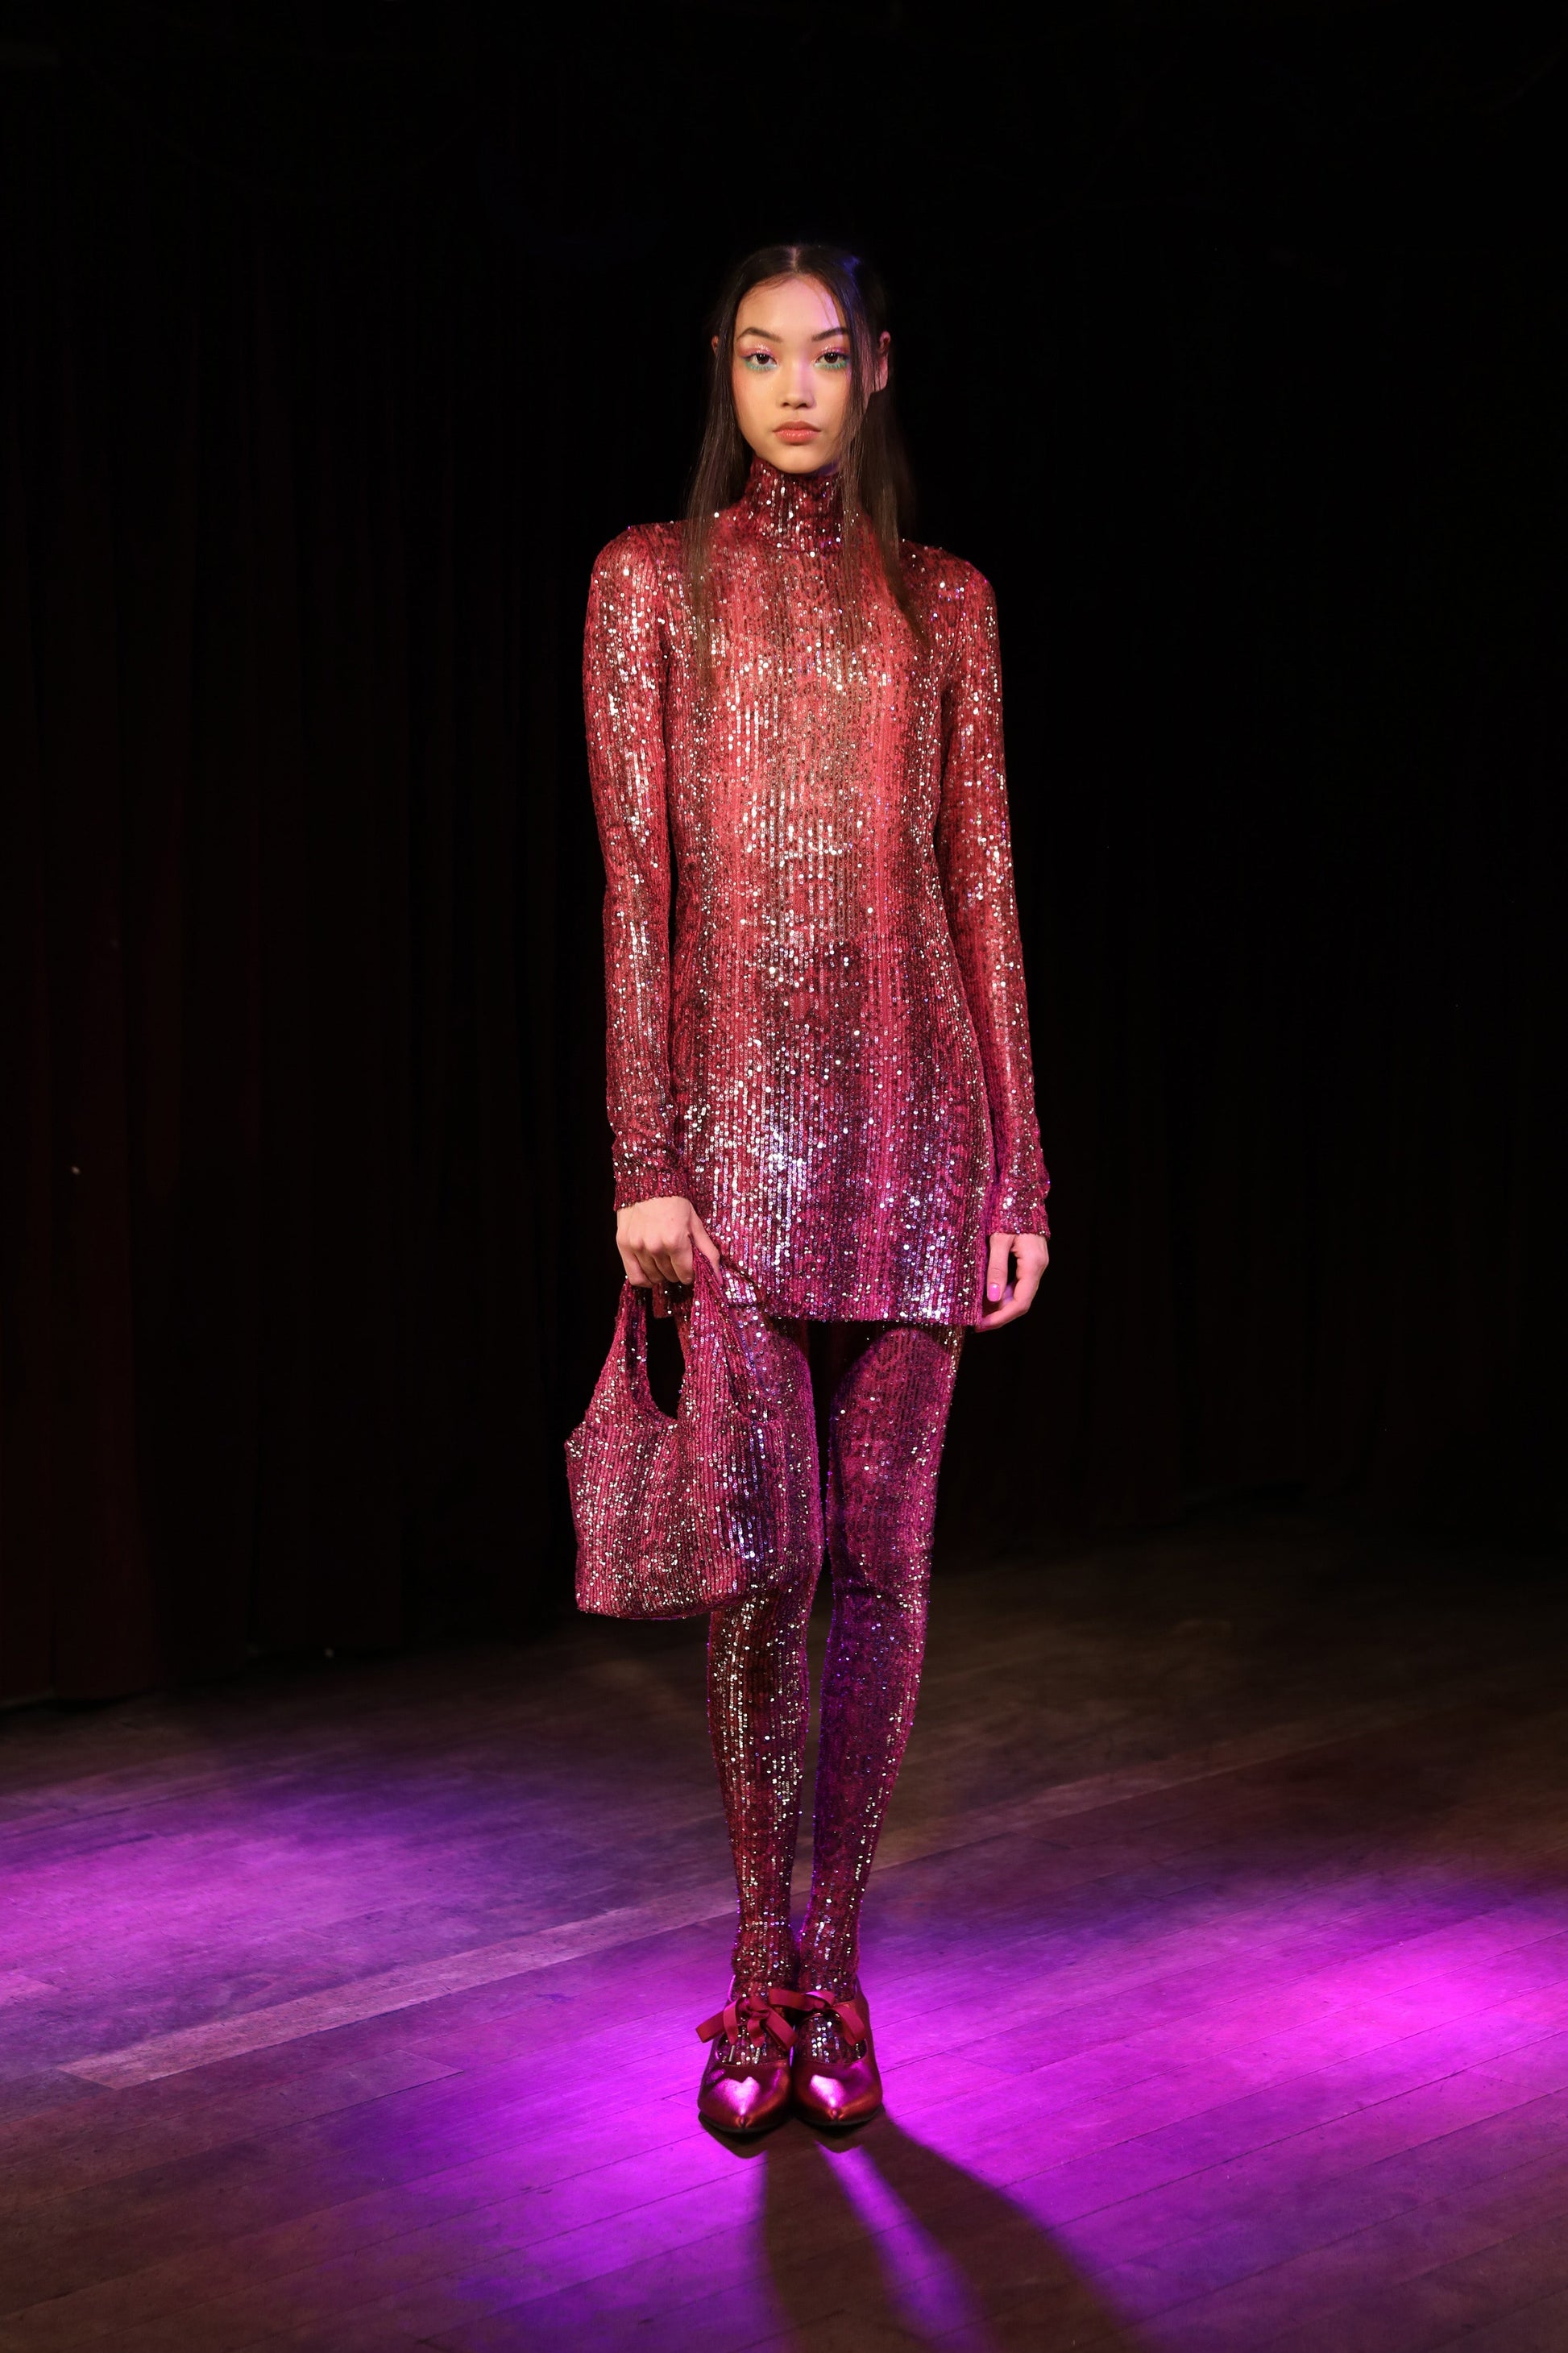 Snakeskin Sequin Turtleneck Mini Dress, work of art will make you the center of attention at events